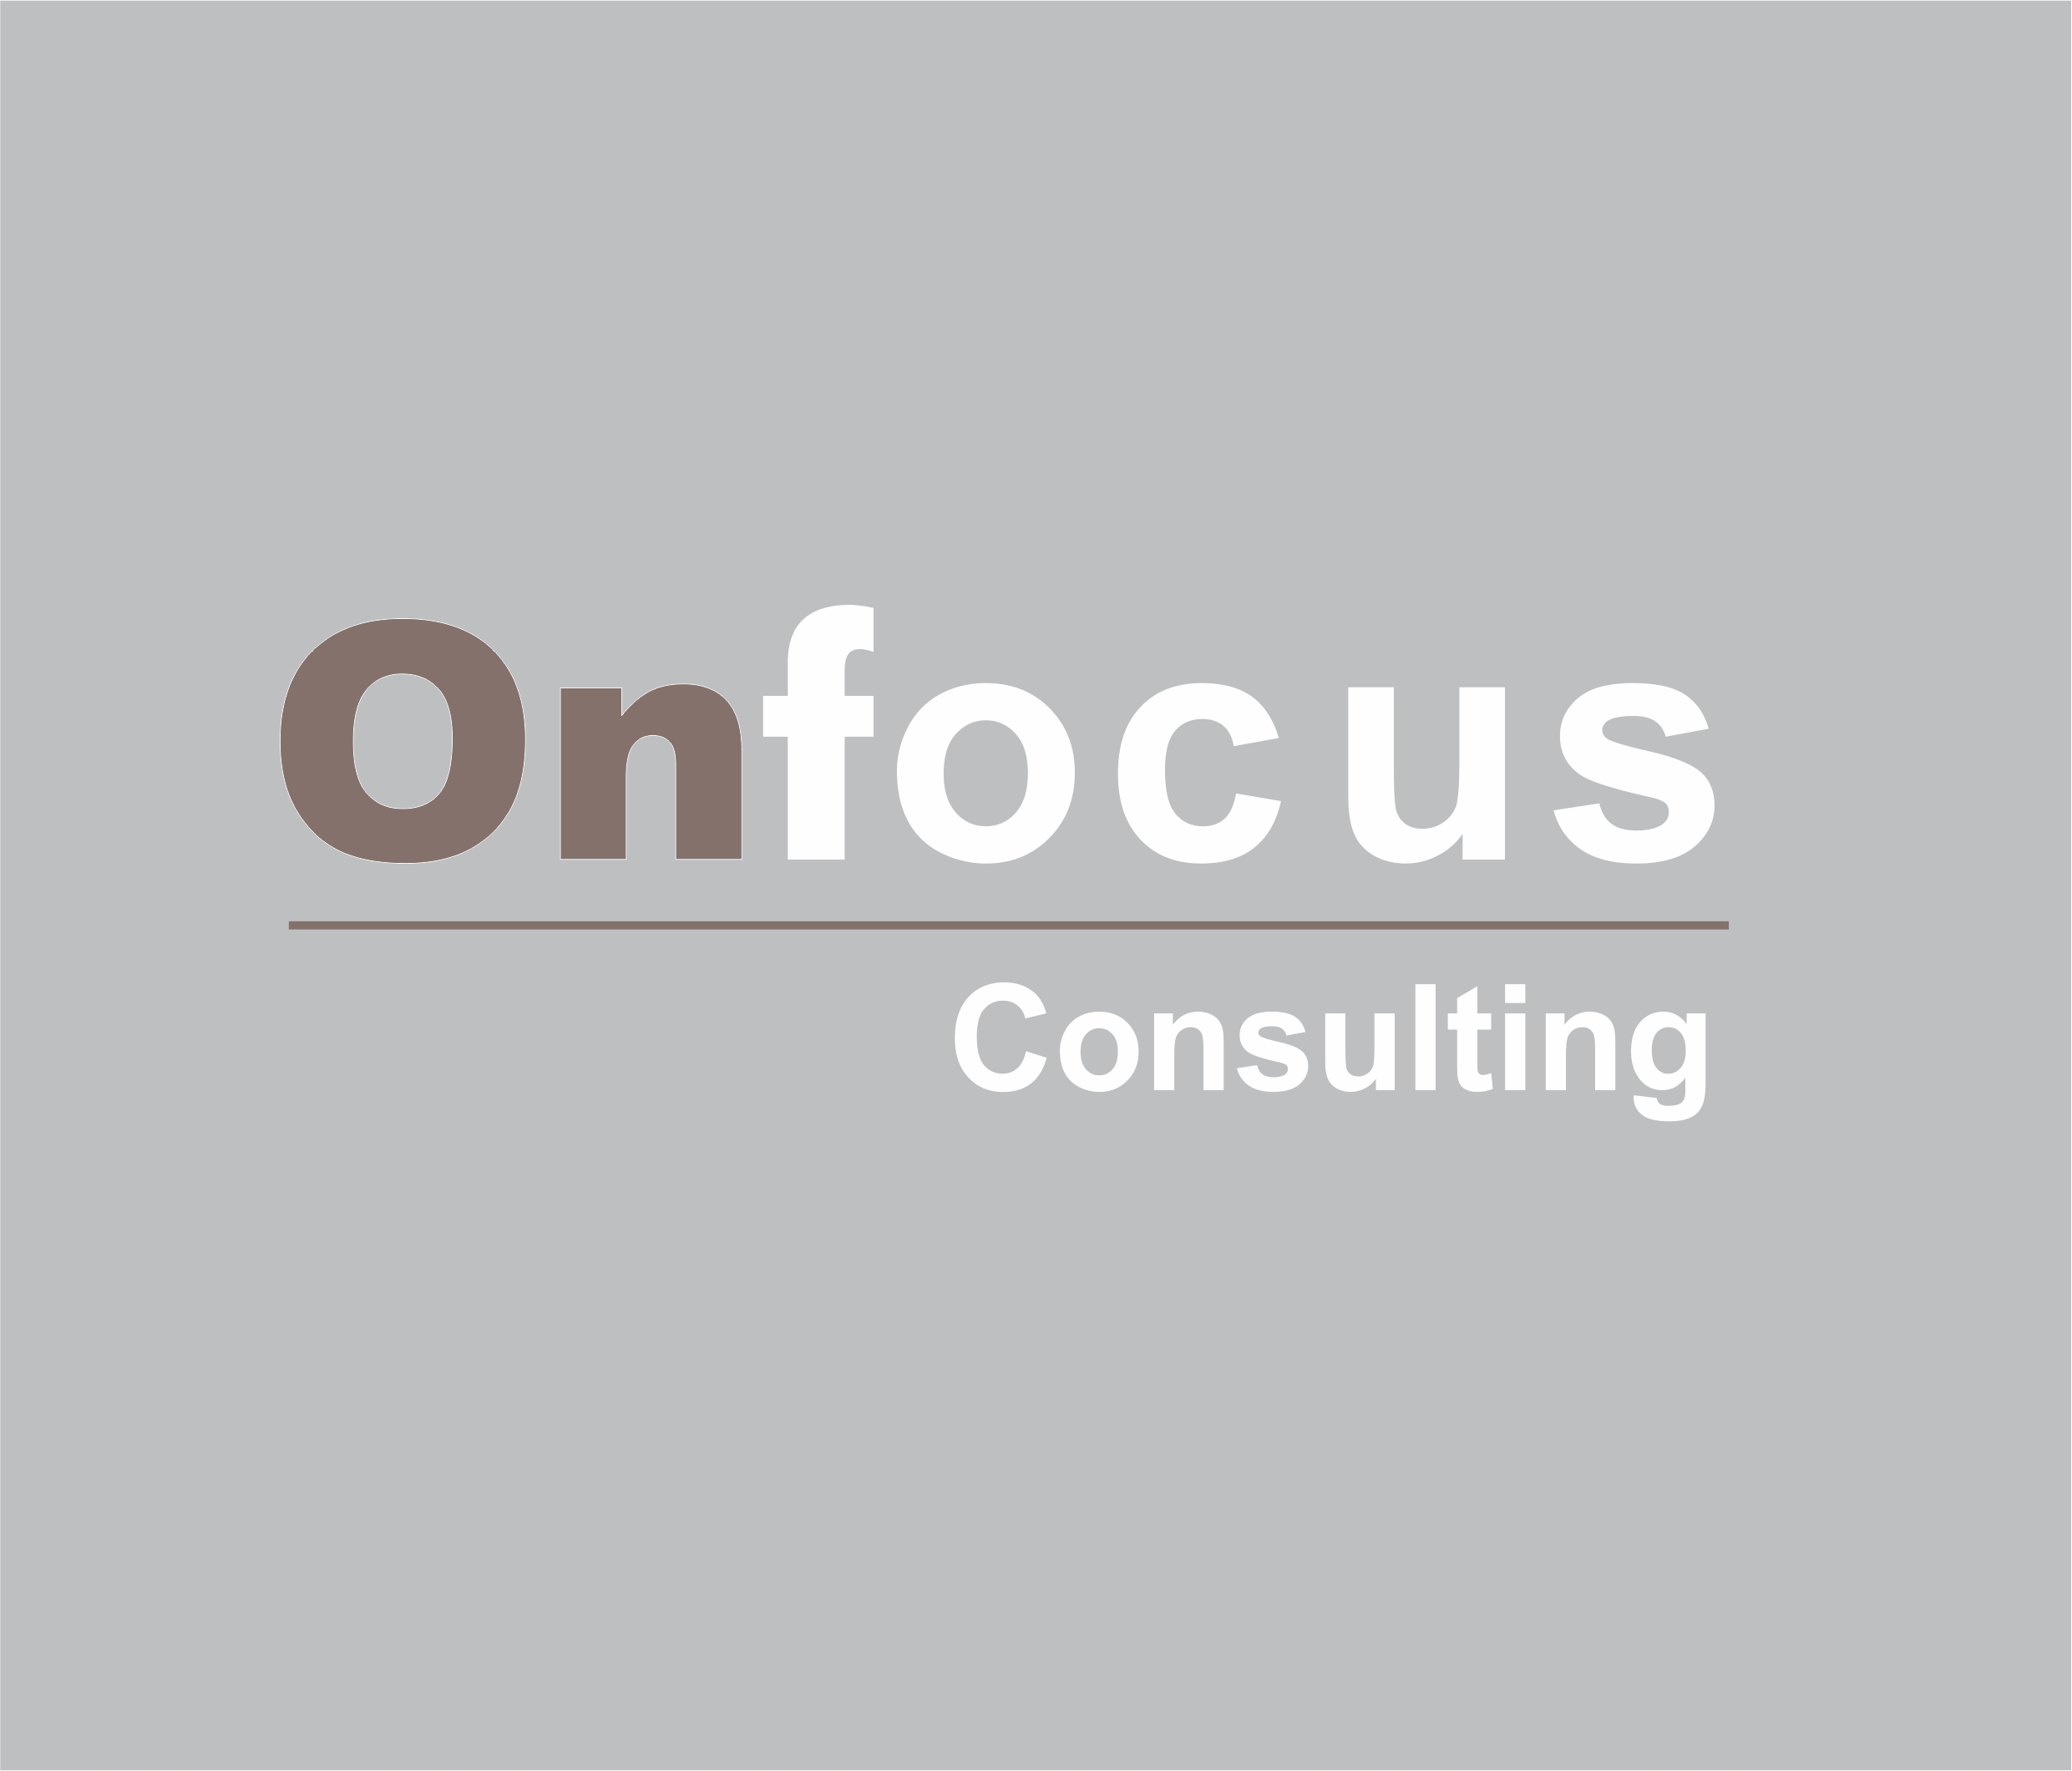 ON FOCUS CONSULTING